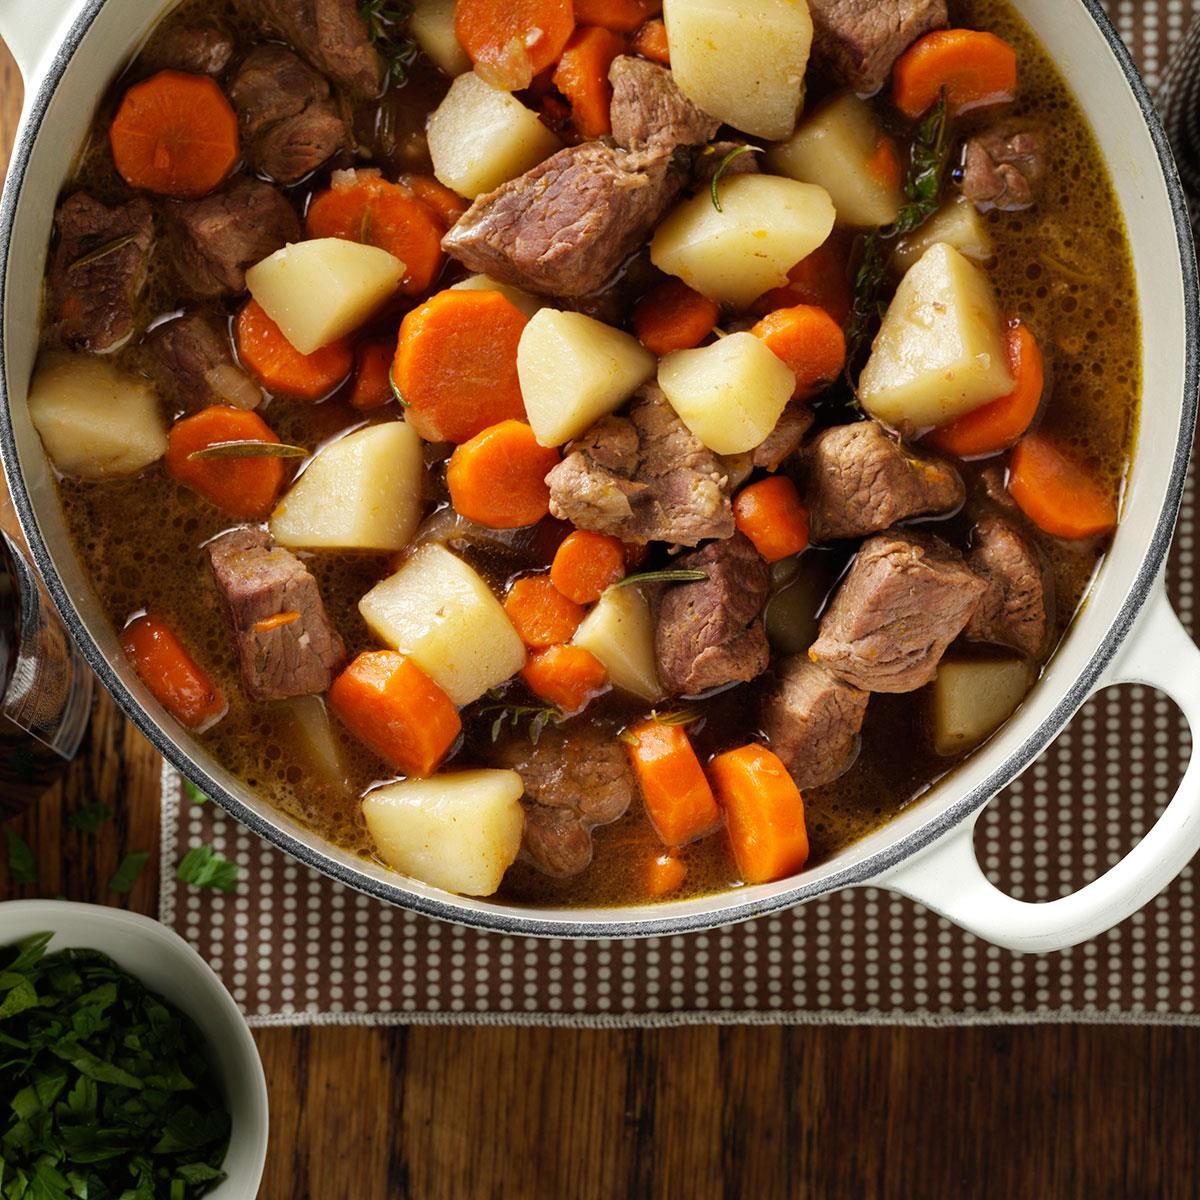 How to Make Restaurant Quality Lamb Stock for Soups and Stews